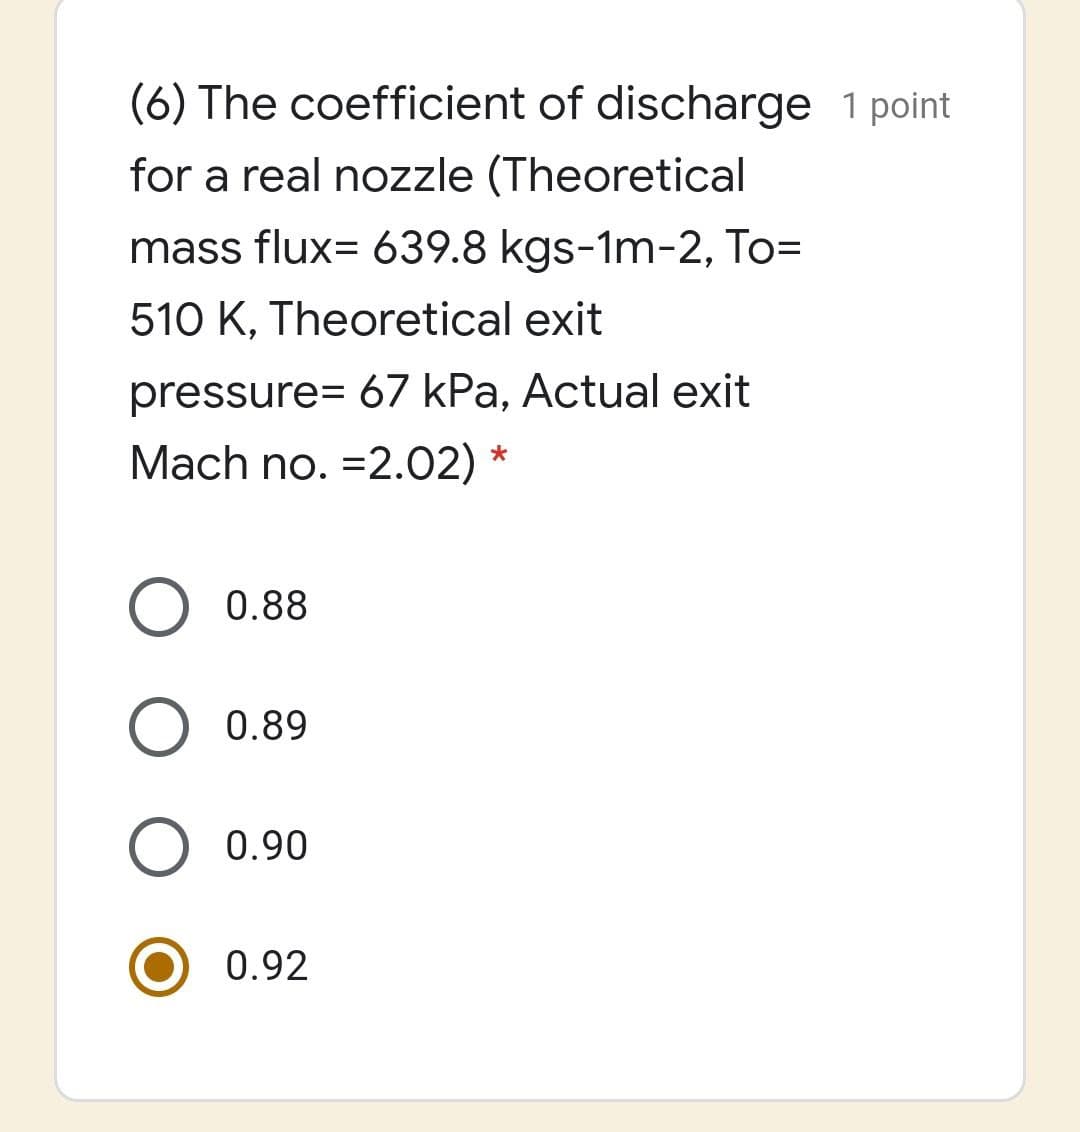 (6) The coefficient of discharge 1 point
for a real nozzle (Theoretical
mass flux= 639.8 kgs-1m-2, To=
510 K, Theoretical exit
pressure= 67 kPa, Actual exit
Mach no. =2.02) *
0.88
0.89
0.90
0.92
